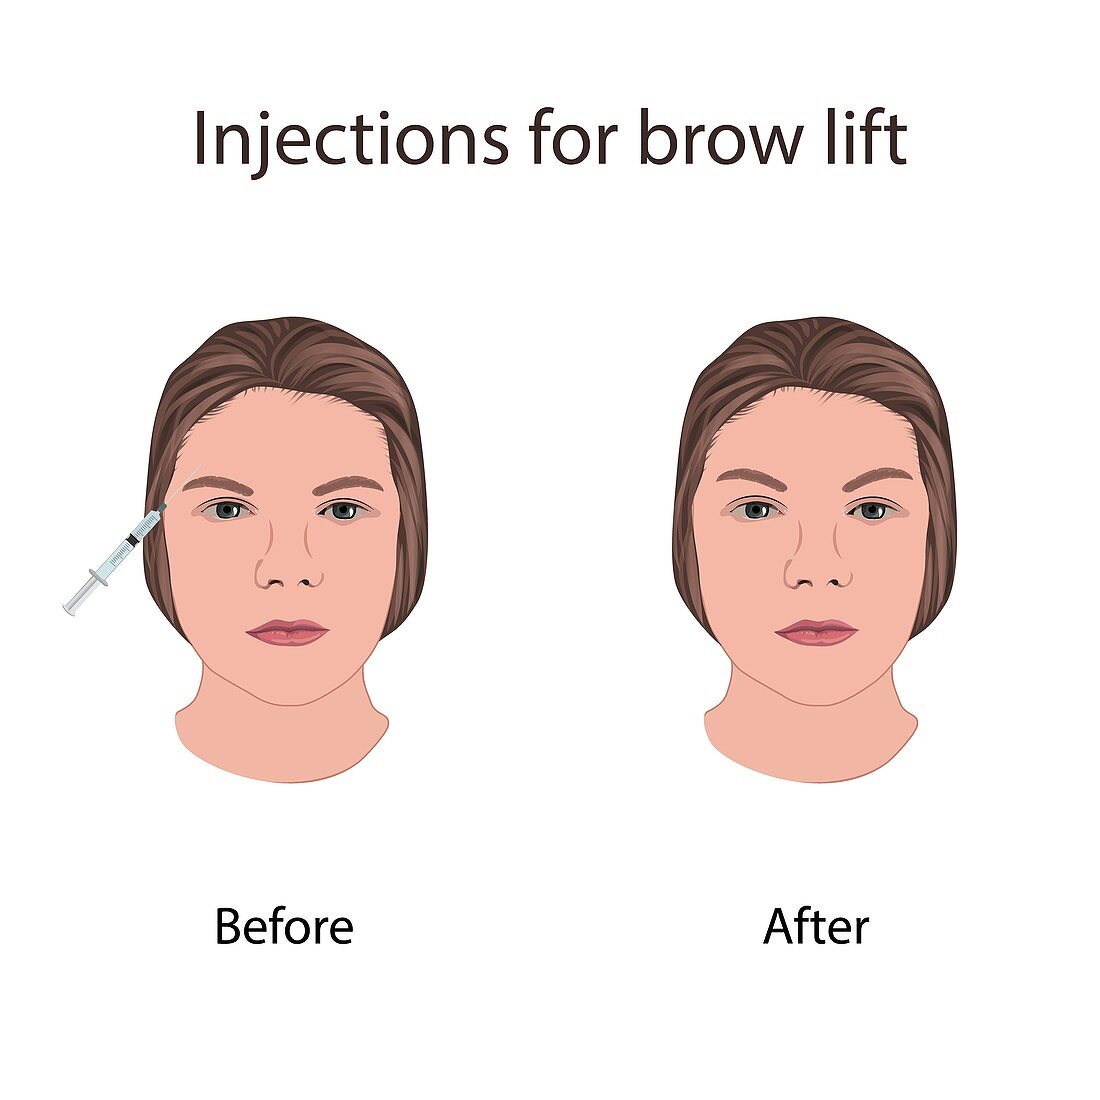 Injections for brow lift, illustration